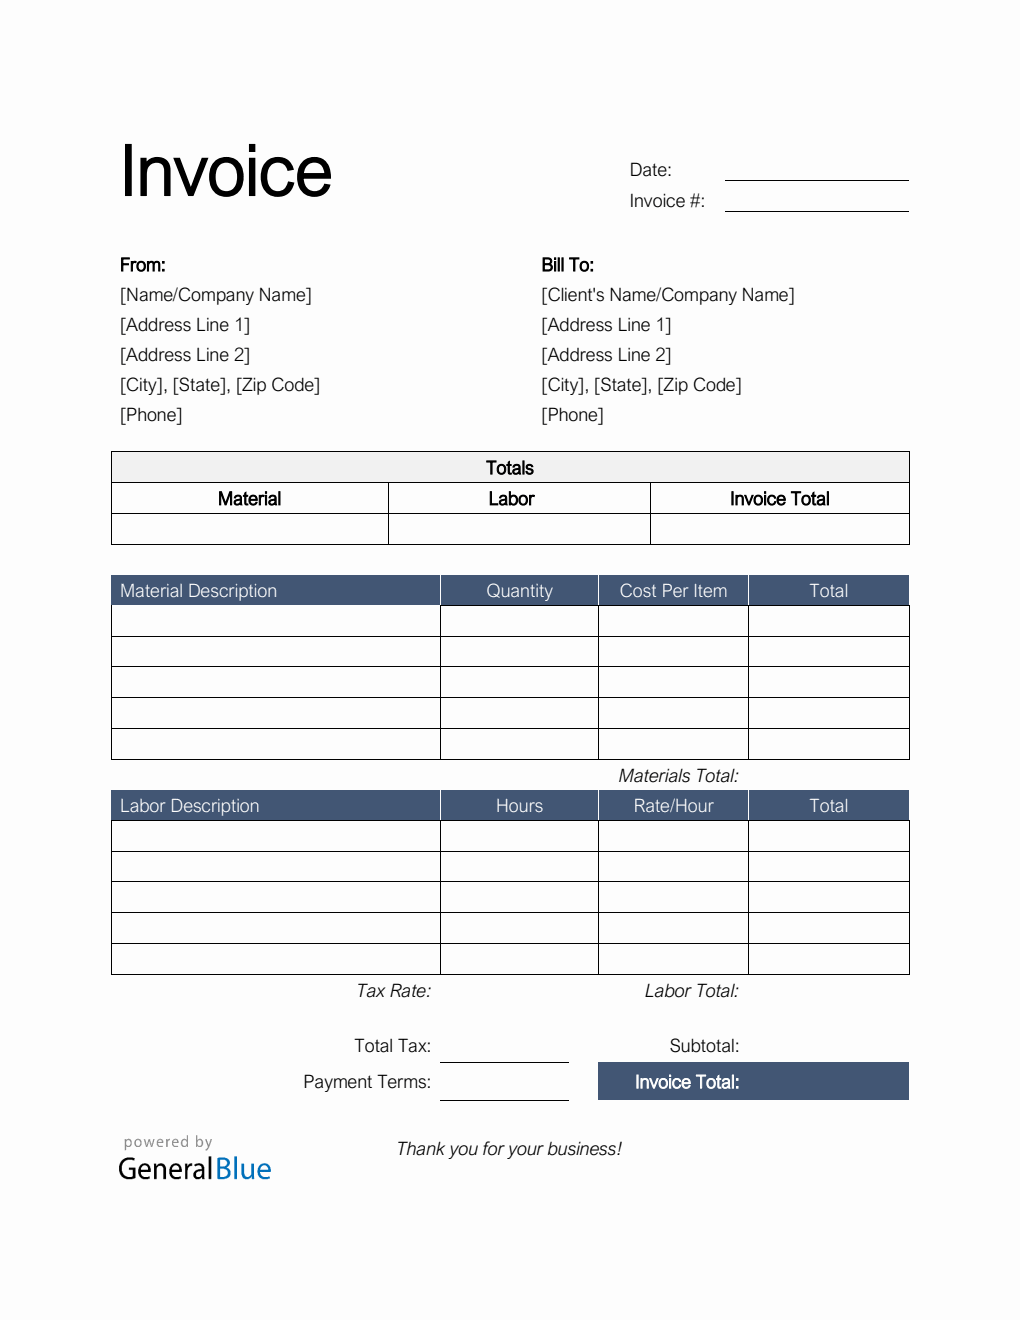 Parts and Labor Invoice in Word (Basic)